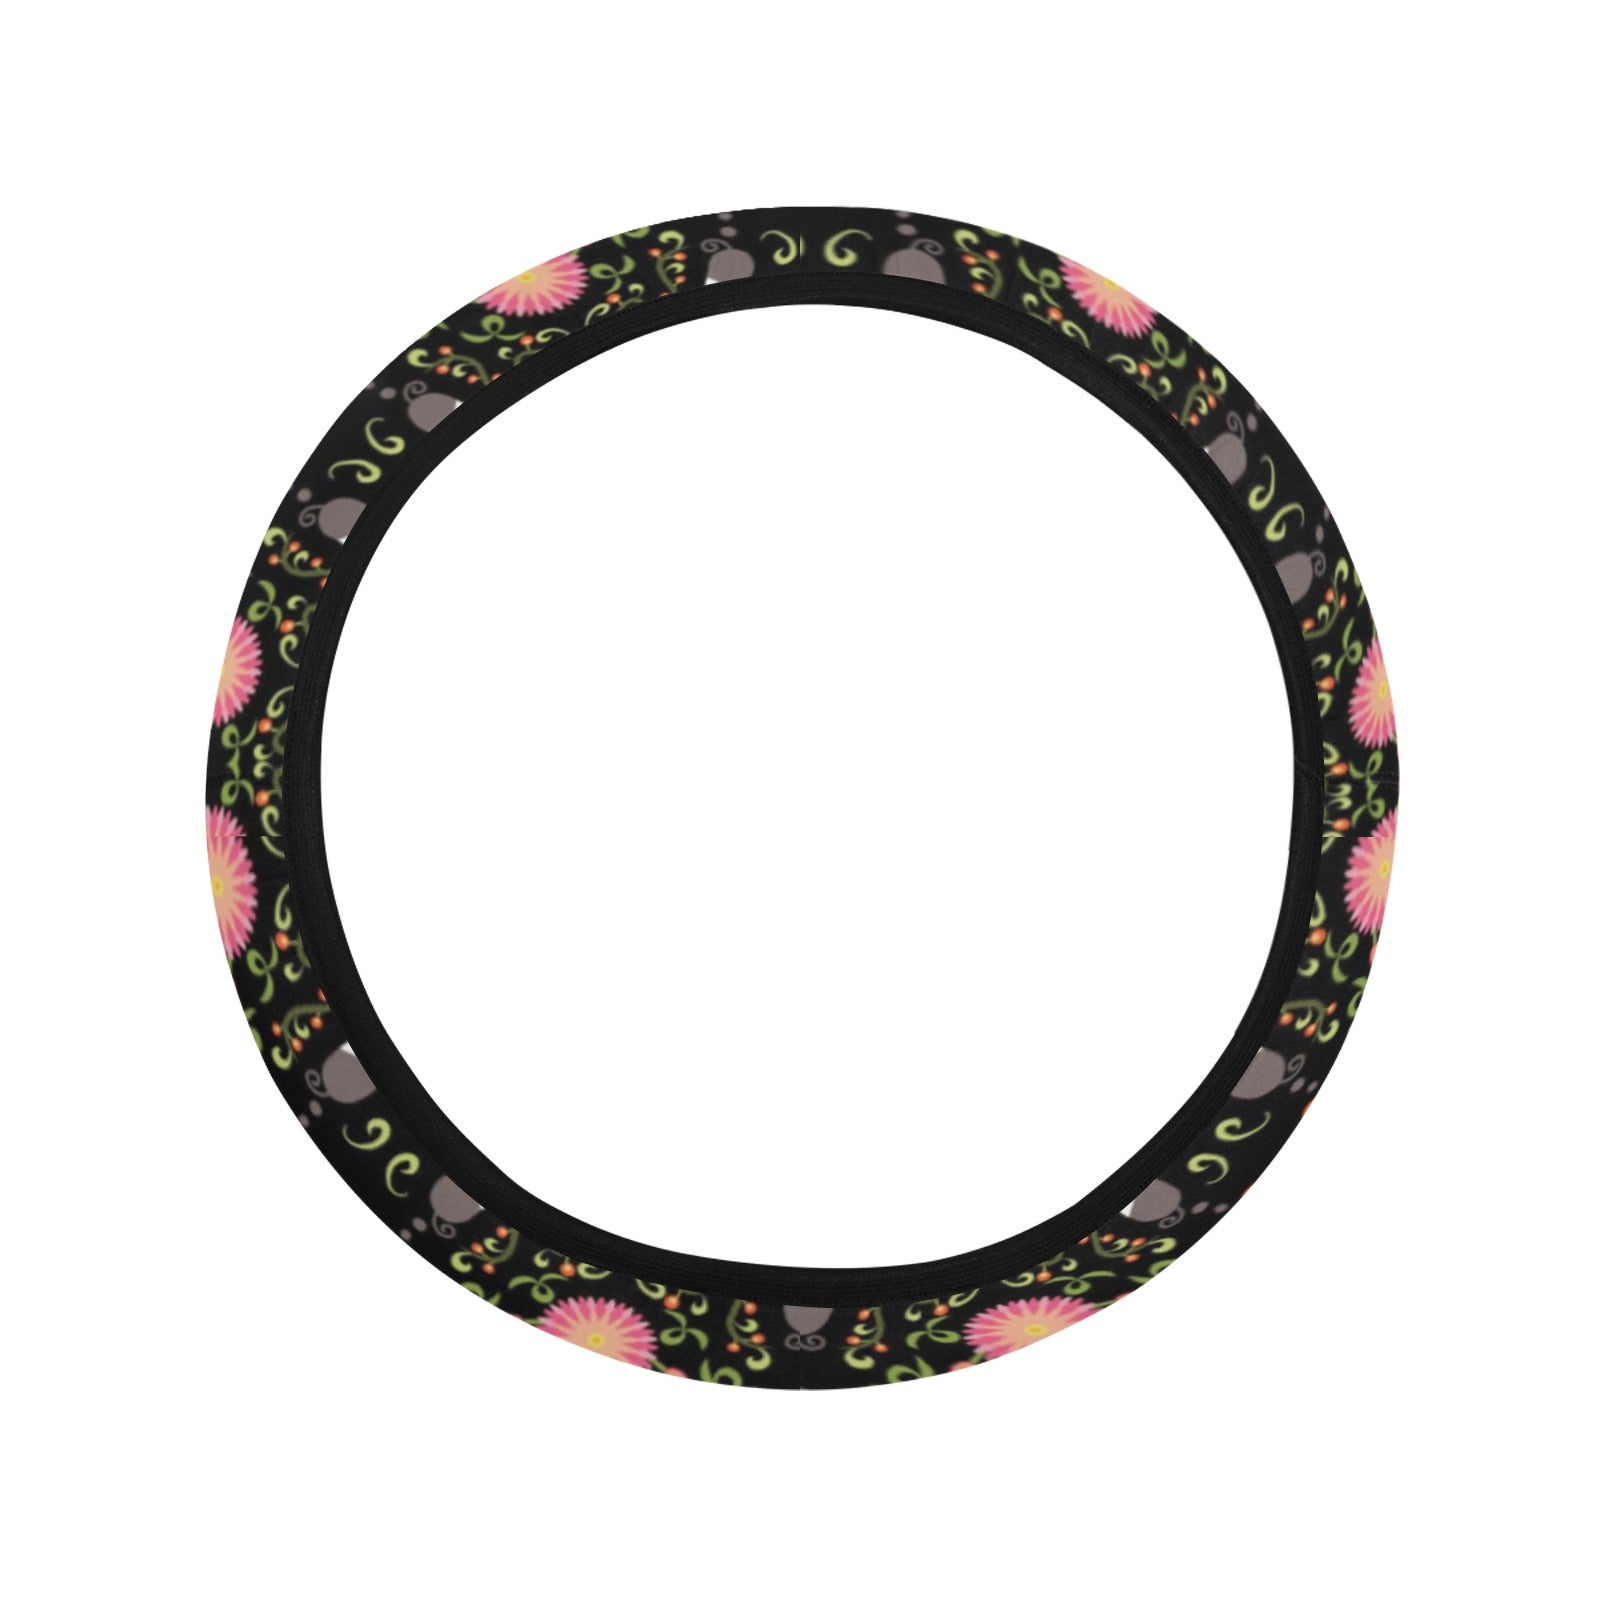 New Growth Steering Wheel Cover with Elastic Edge